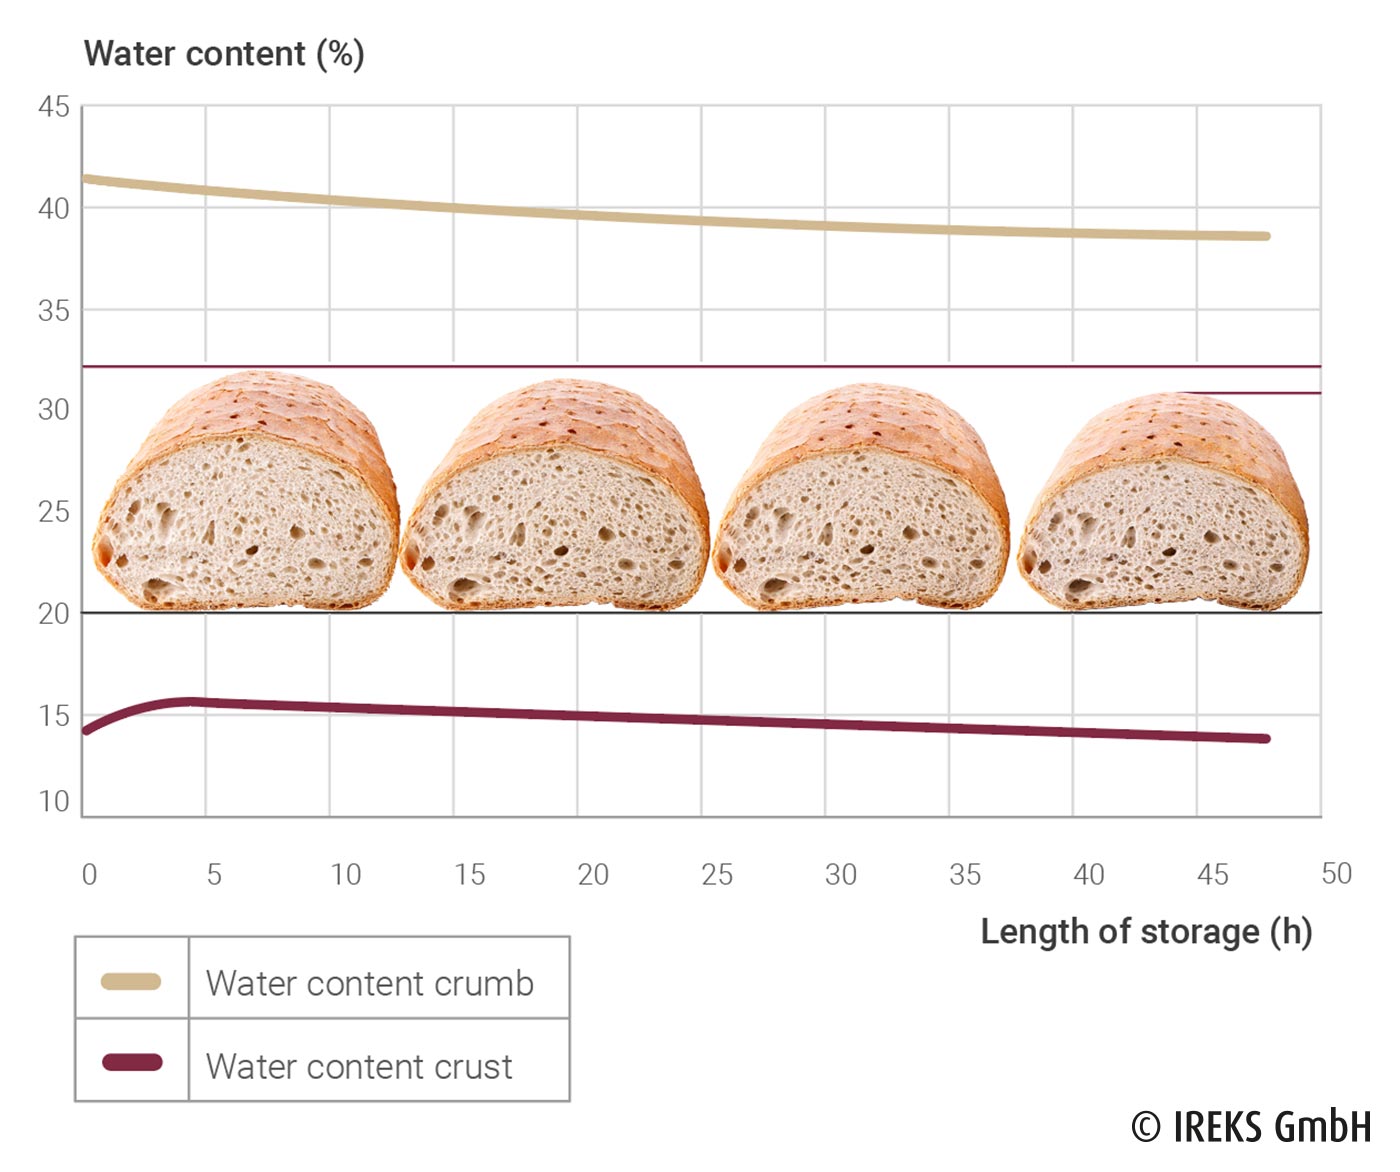 Volume loss and change in water content of crust and crumb as a function of storage time in an unpackaged mixed wheat bread 80/20 